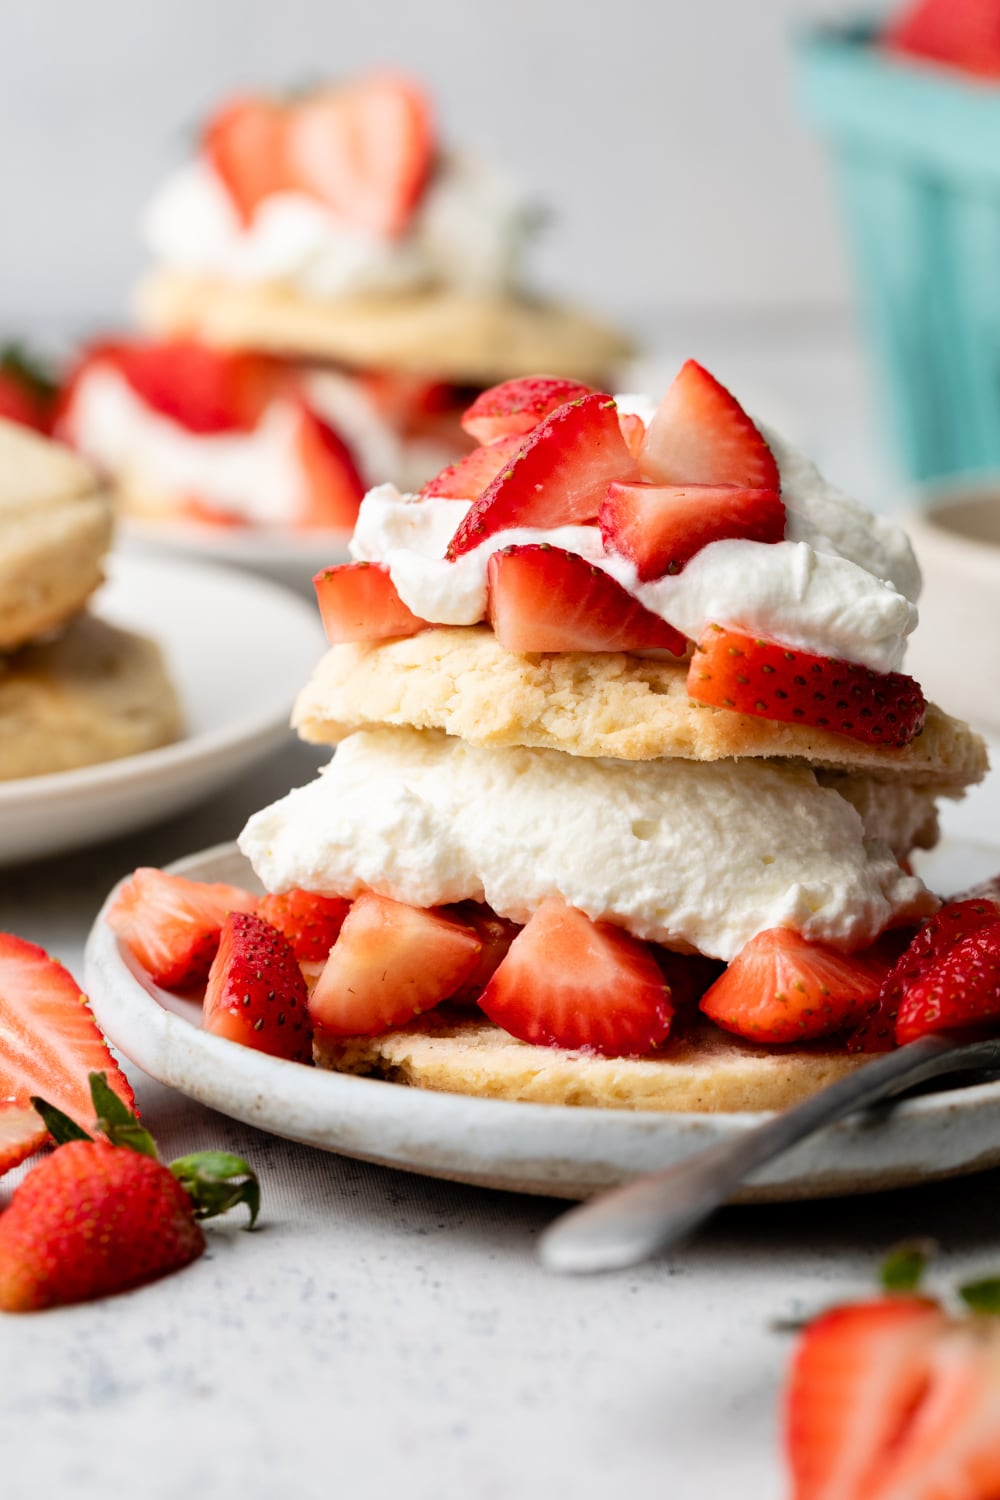 Plate with layers of gluten free shortcake biscuits, whipped cream, and strawberries with a fork on the side.